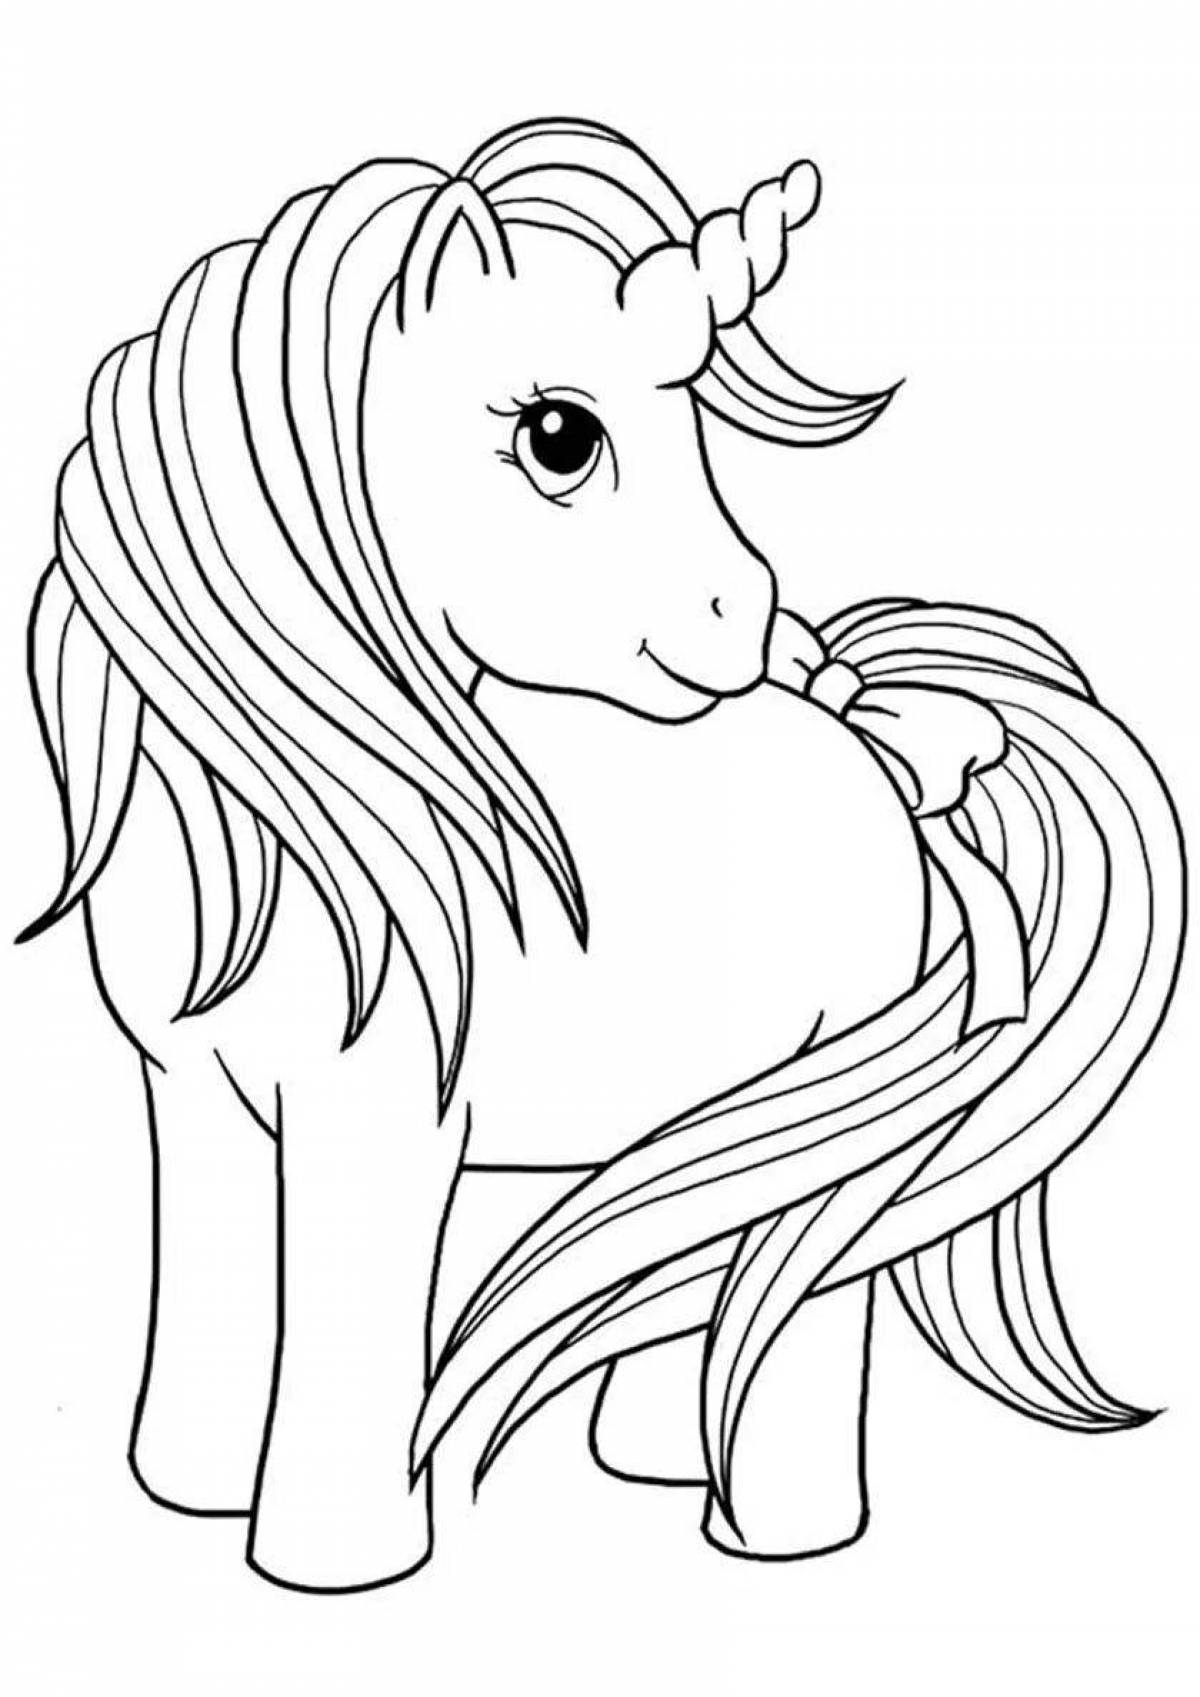 A tempting unicorn coloring book for kids